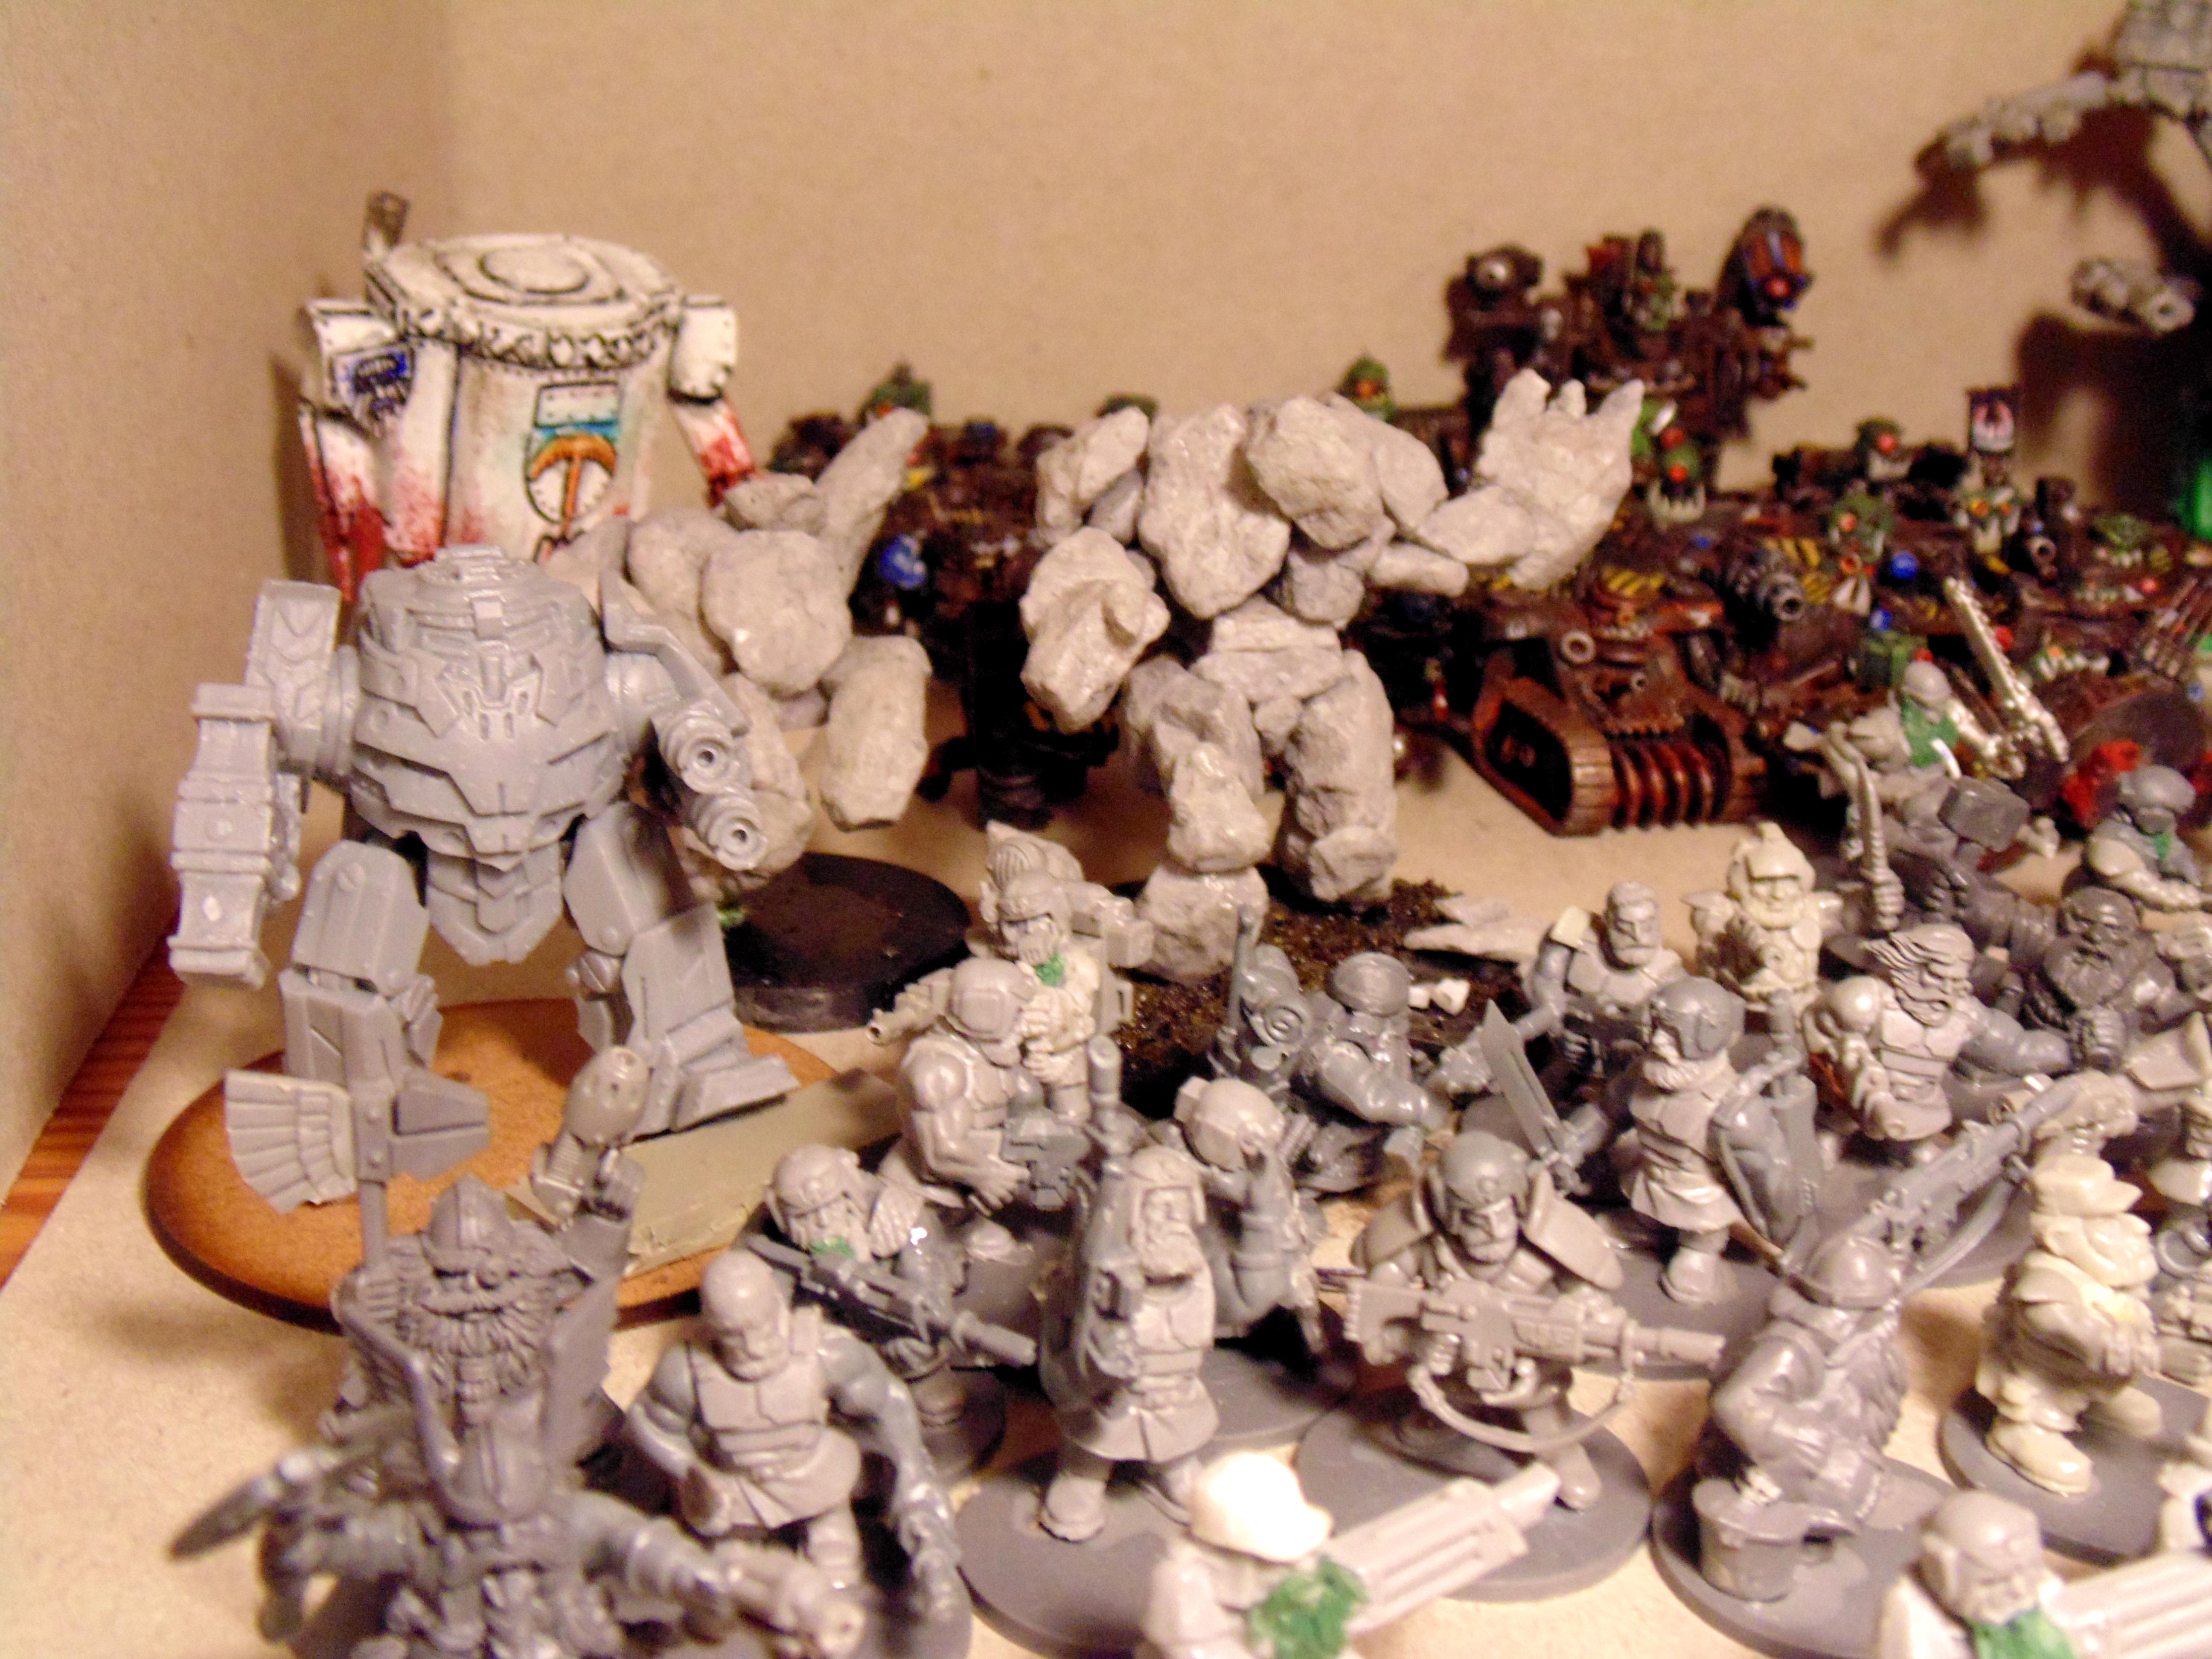 Army, Bike, Codex, Conversion, Creatures, Dwarves, Exo, Exosuits, Green, Heavy, Imp, Imperial, Metal, Old, Oldhammer, Rogue, School, Scratch, Scratch Build, Squad, Squats, Stone, Stuff, Suit, Trader, Votann, White